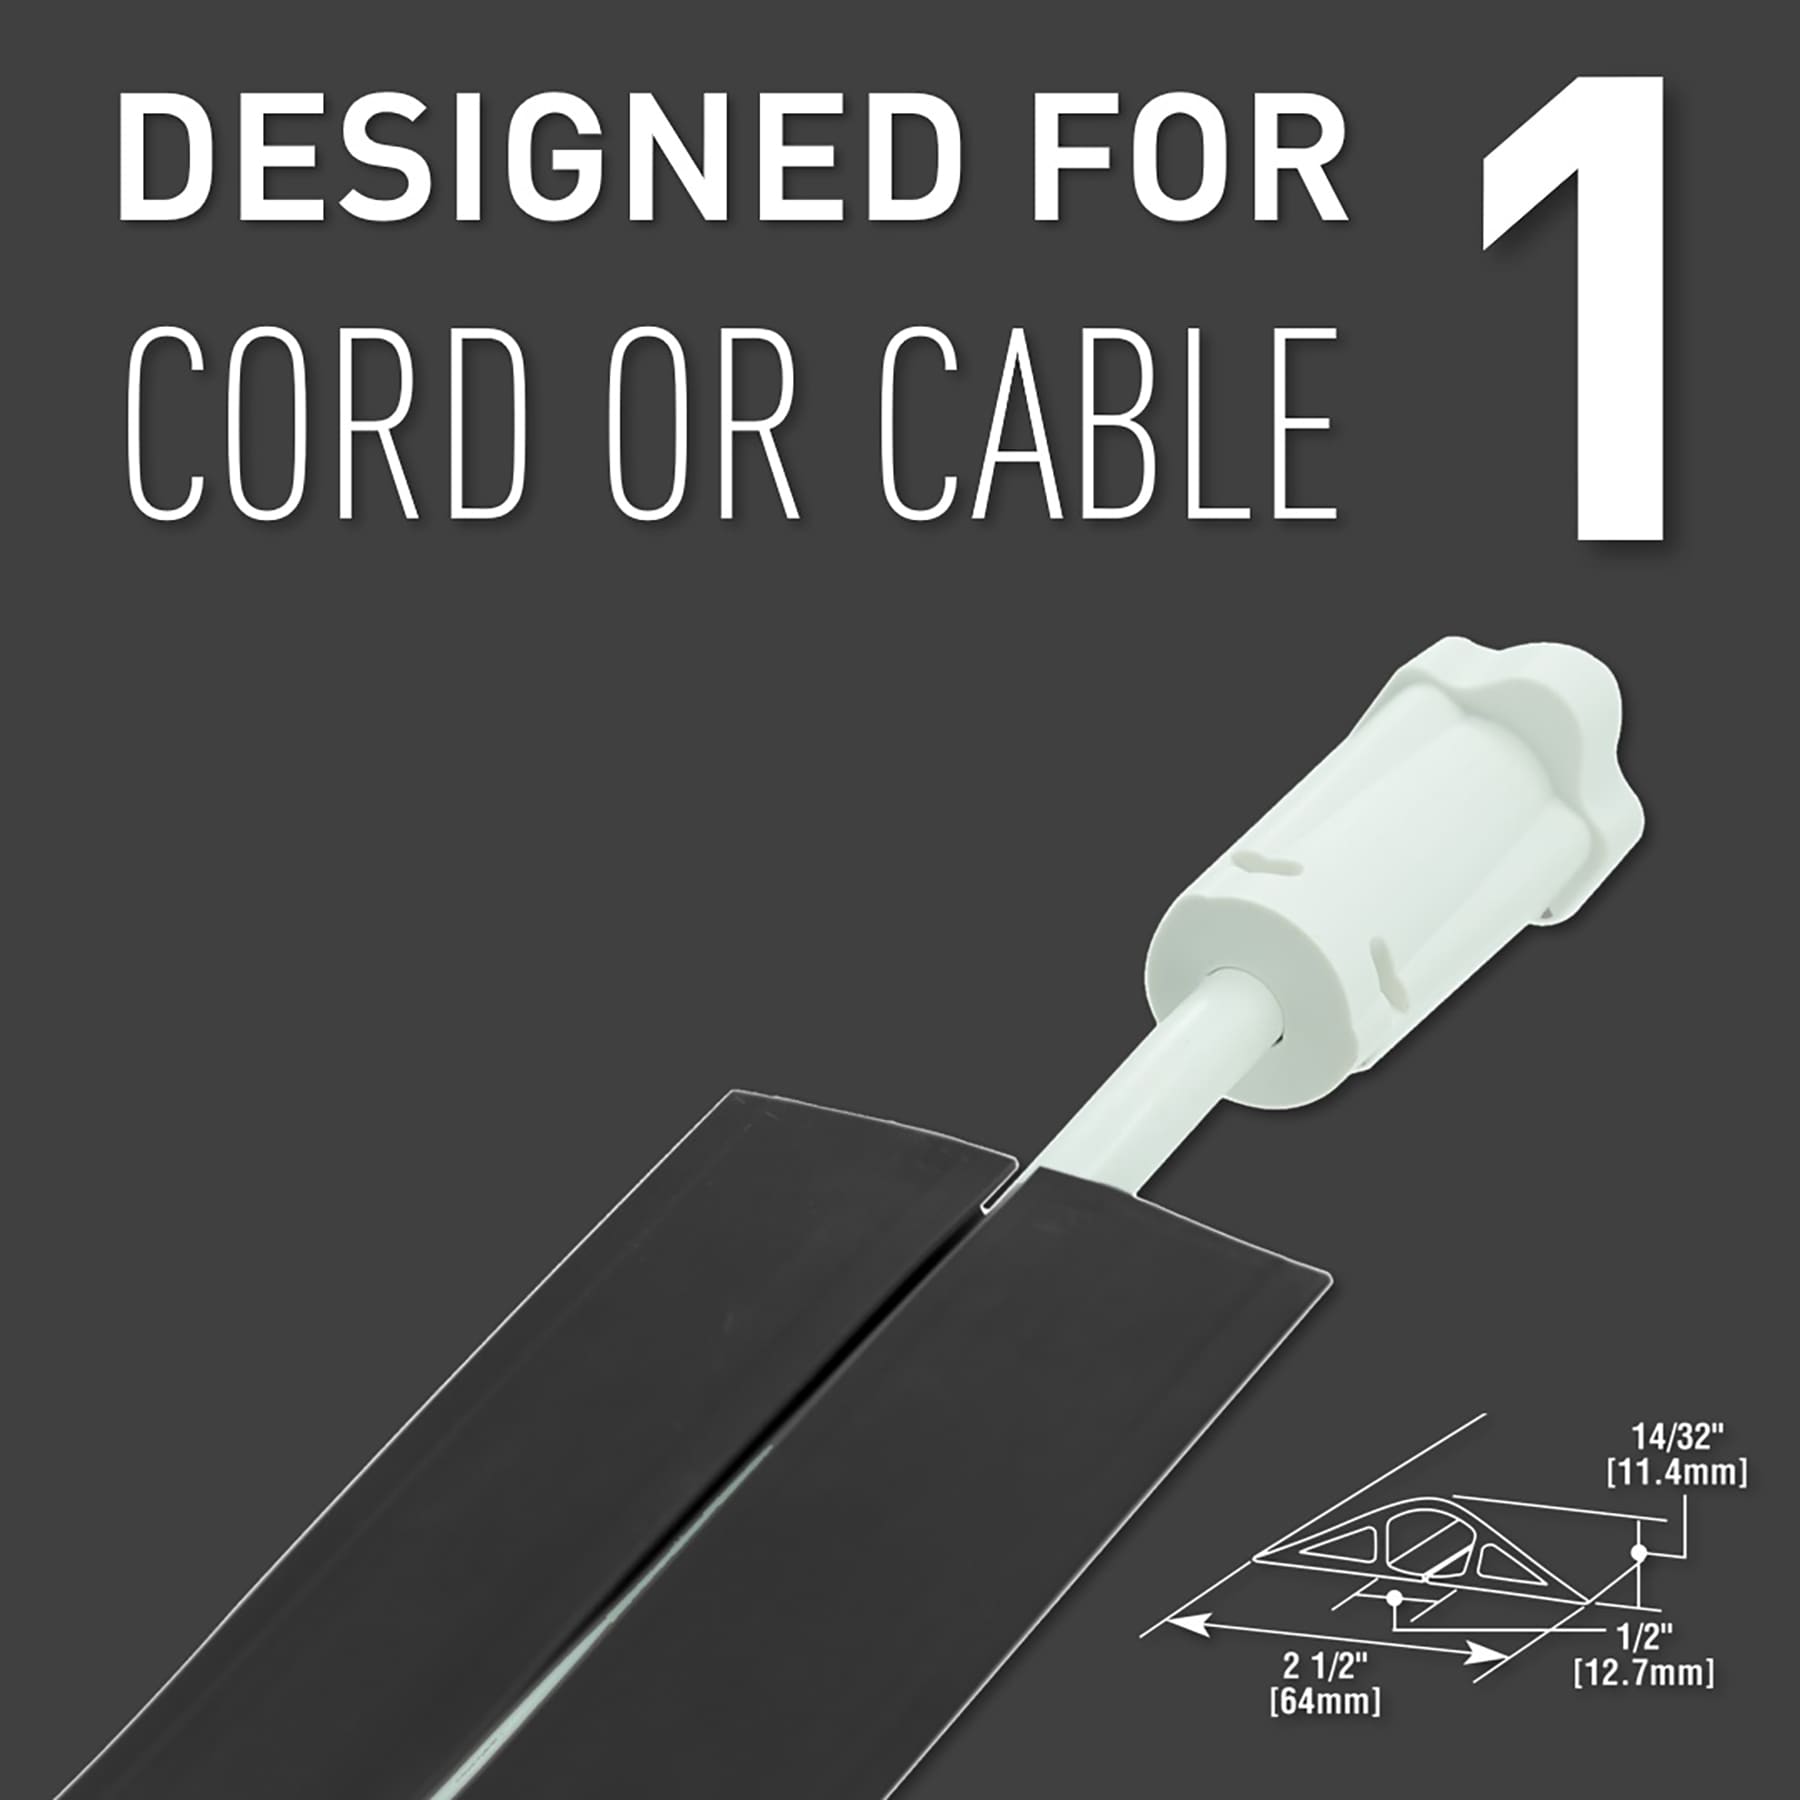 Legrand Wiremold CordMate III High-Capacity Cord Cover 15 ft. Kit